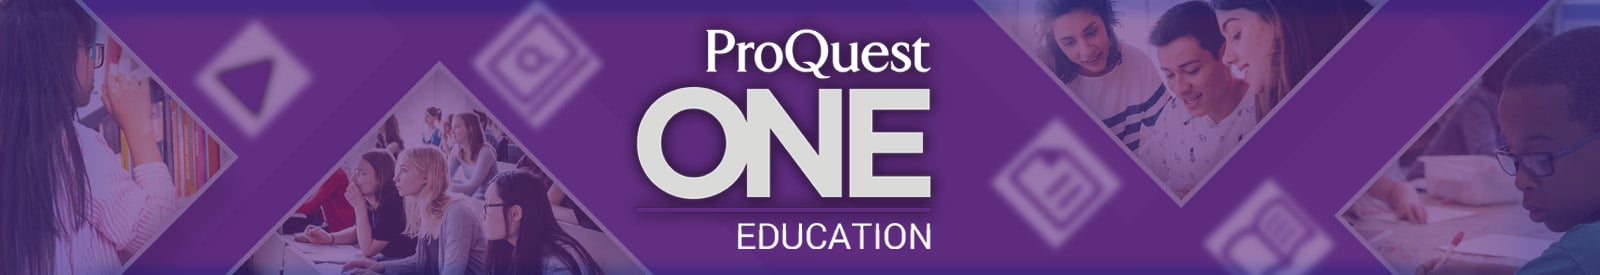 ProQuest One Education